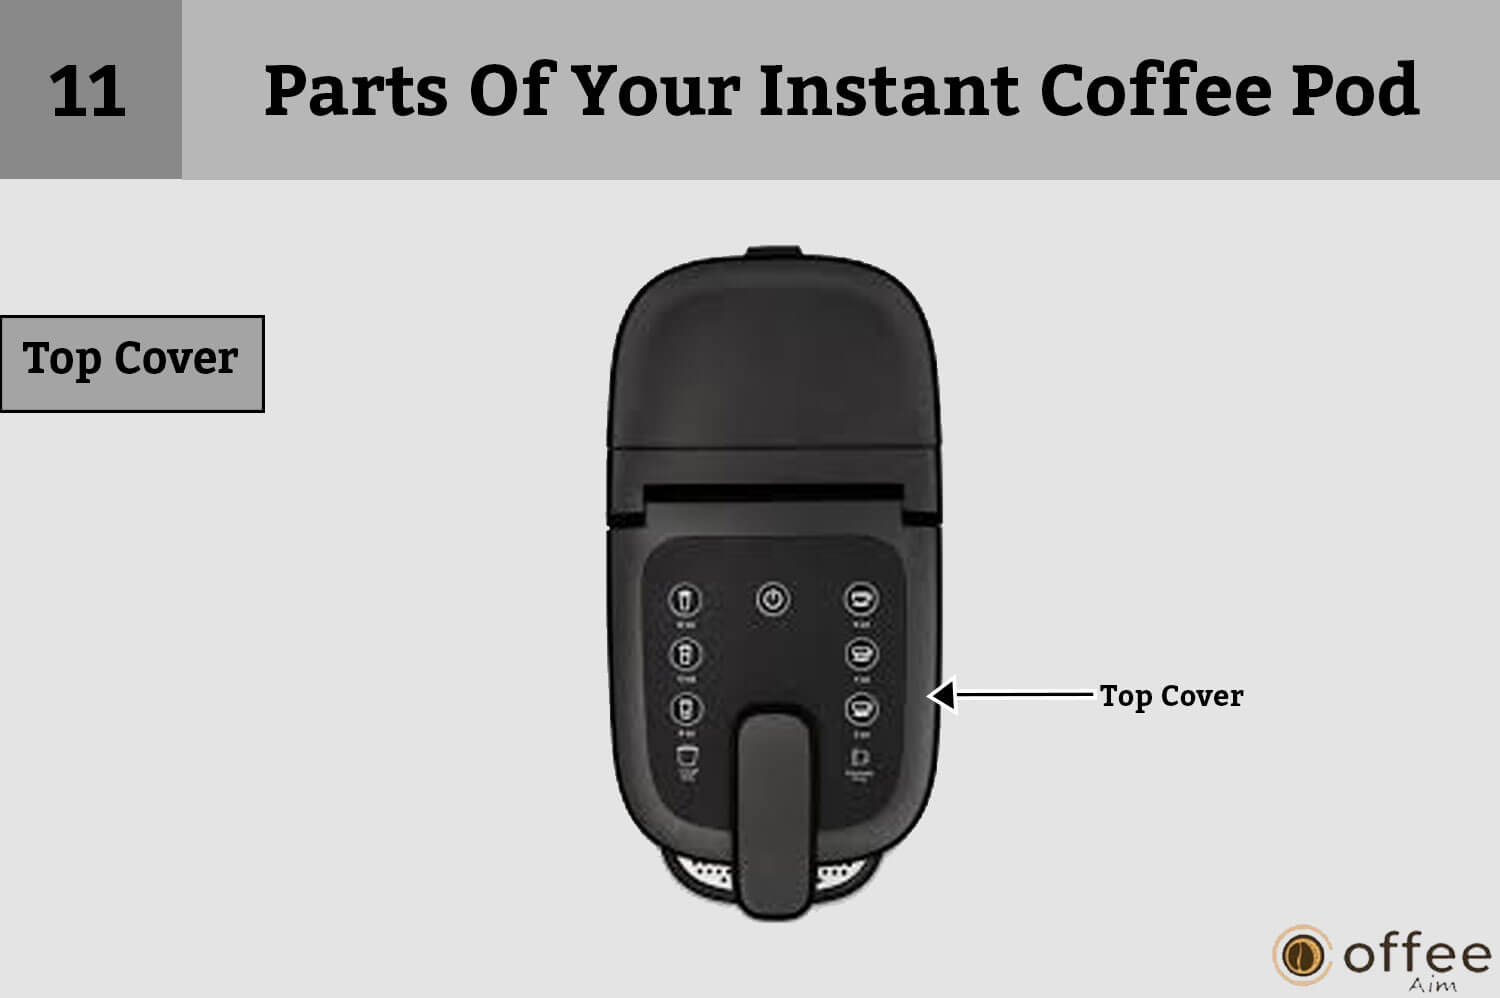 This image displays the "Top Cover" as part of our article on "Parts of Your Instant Coffee Pod: How to Connect Nespresso Vertuo Creatista Machine" in clear and detailed English.